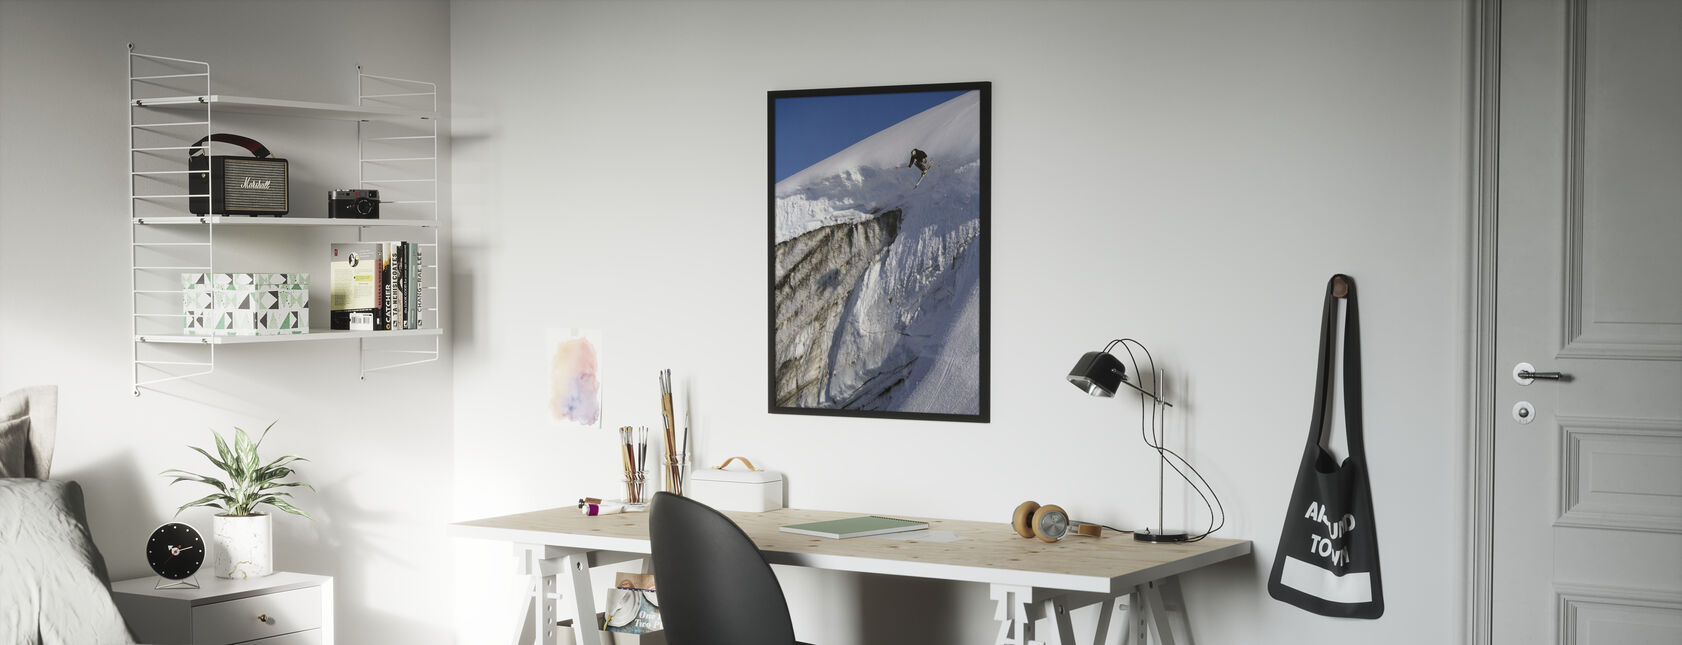 Skiing on the Apussuit Glacier - Poster - Kids Room